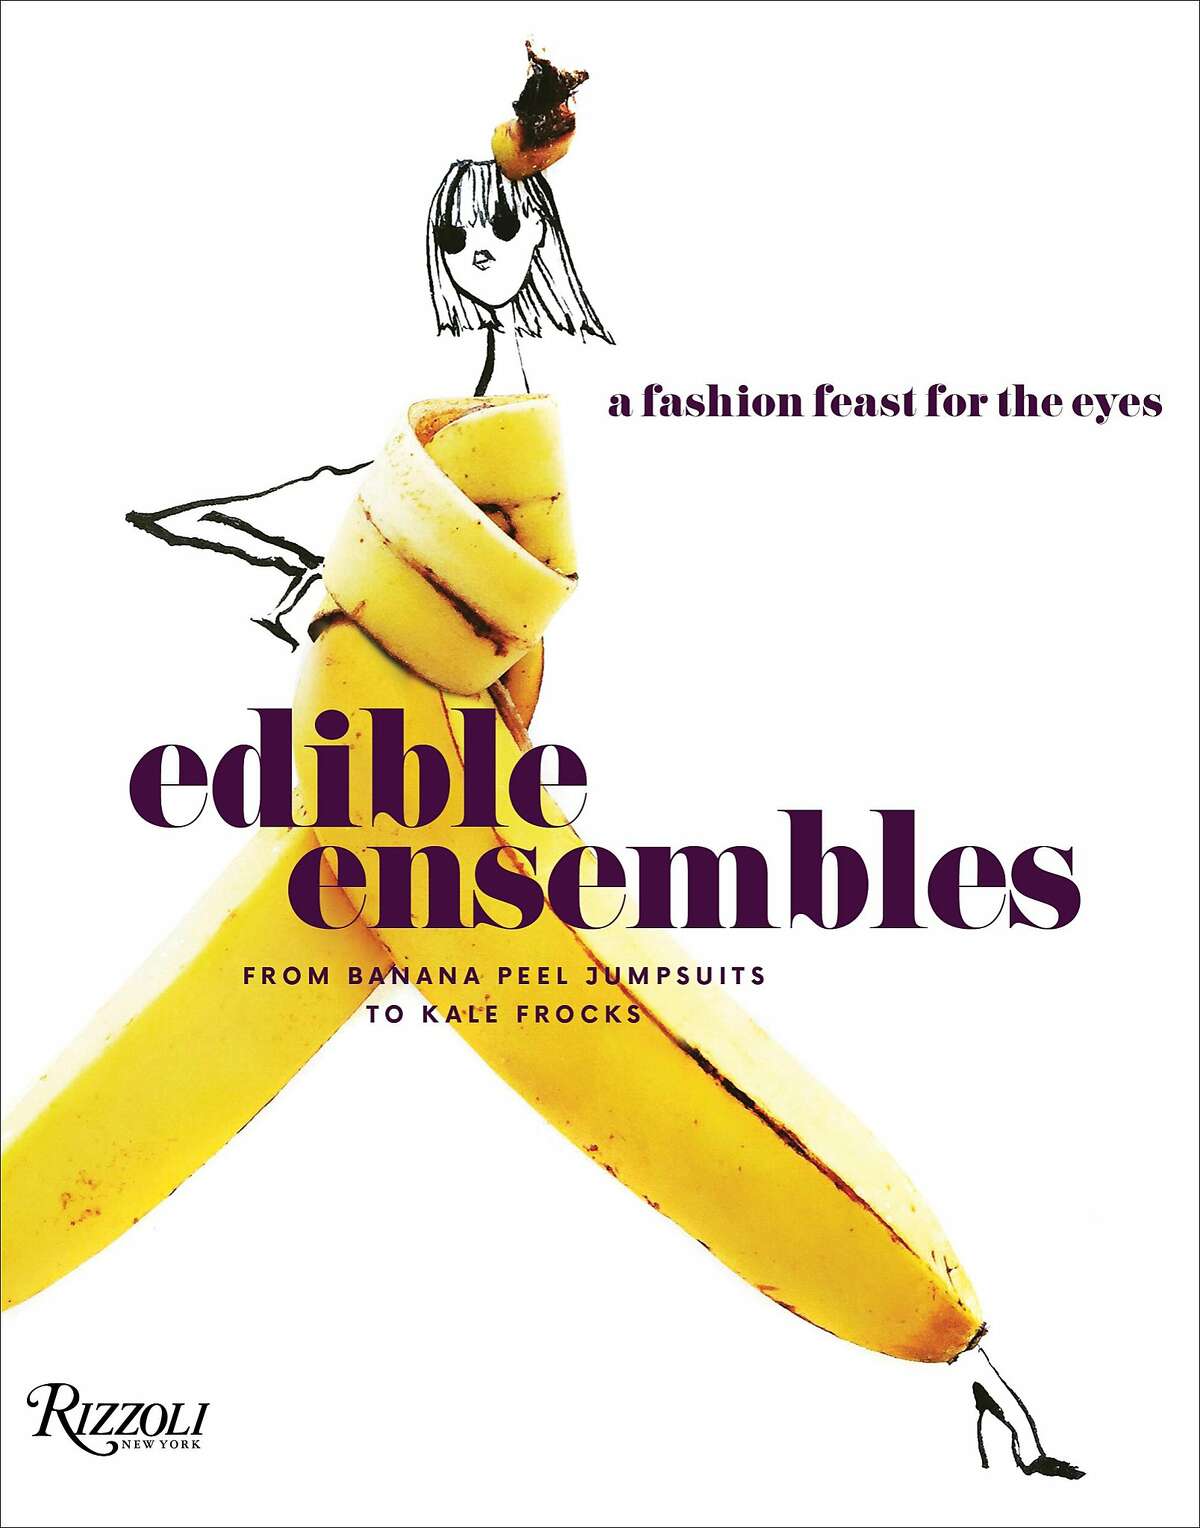 "Edible Ensembles: A Fashion Feast for the Eyes from Banana Peel Jumpsuits to Kale Frocks," by Gretchen R�ehrs (Rizzoli New York; 96 pages; $24.95) collects the San Francisco illustrator's whimsical figures creatively clad in fruits and vegetables.